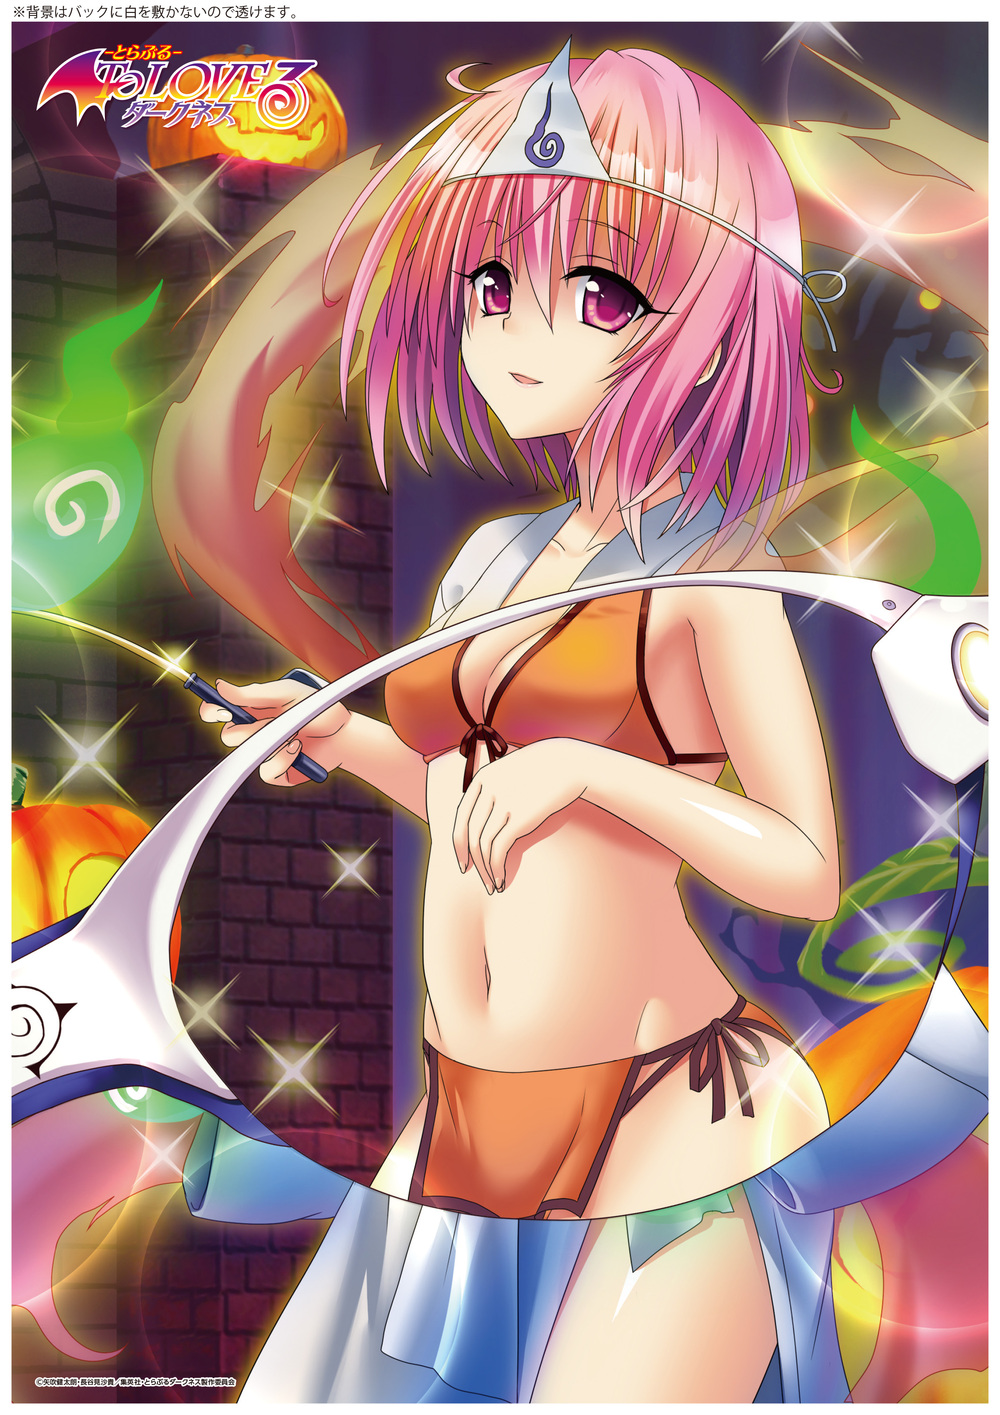 To Love Ru Darkness A3 Clear Poster Momo Blindfold Halloween Ver To Loveる とらぶる ダークネス A3クリアポスター モモ 目隠しハロウィンver Anime Goods Illustrations